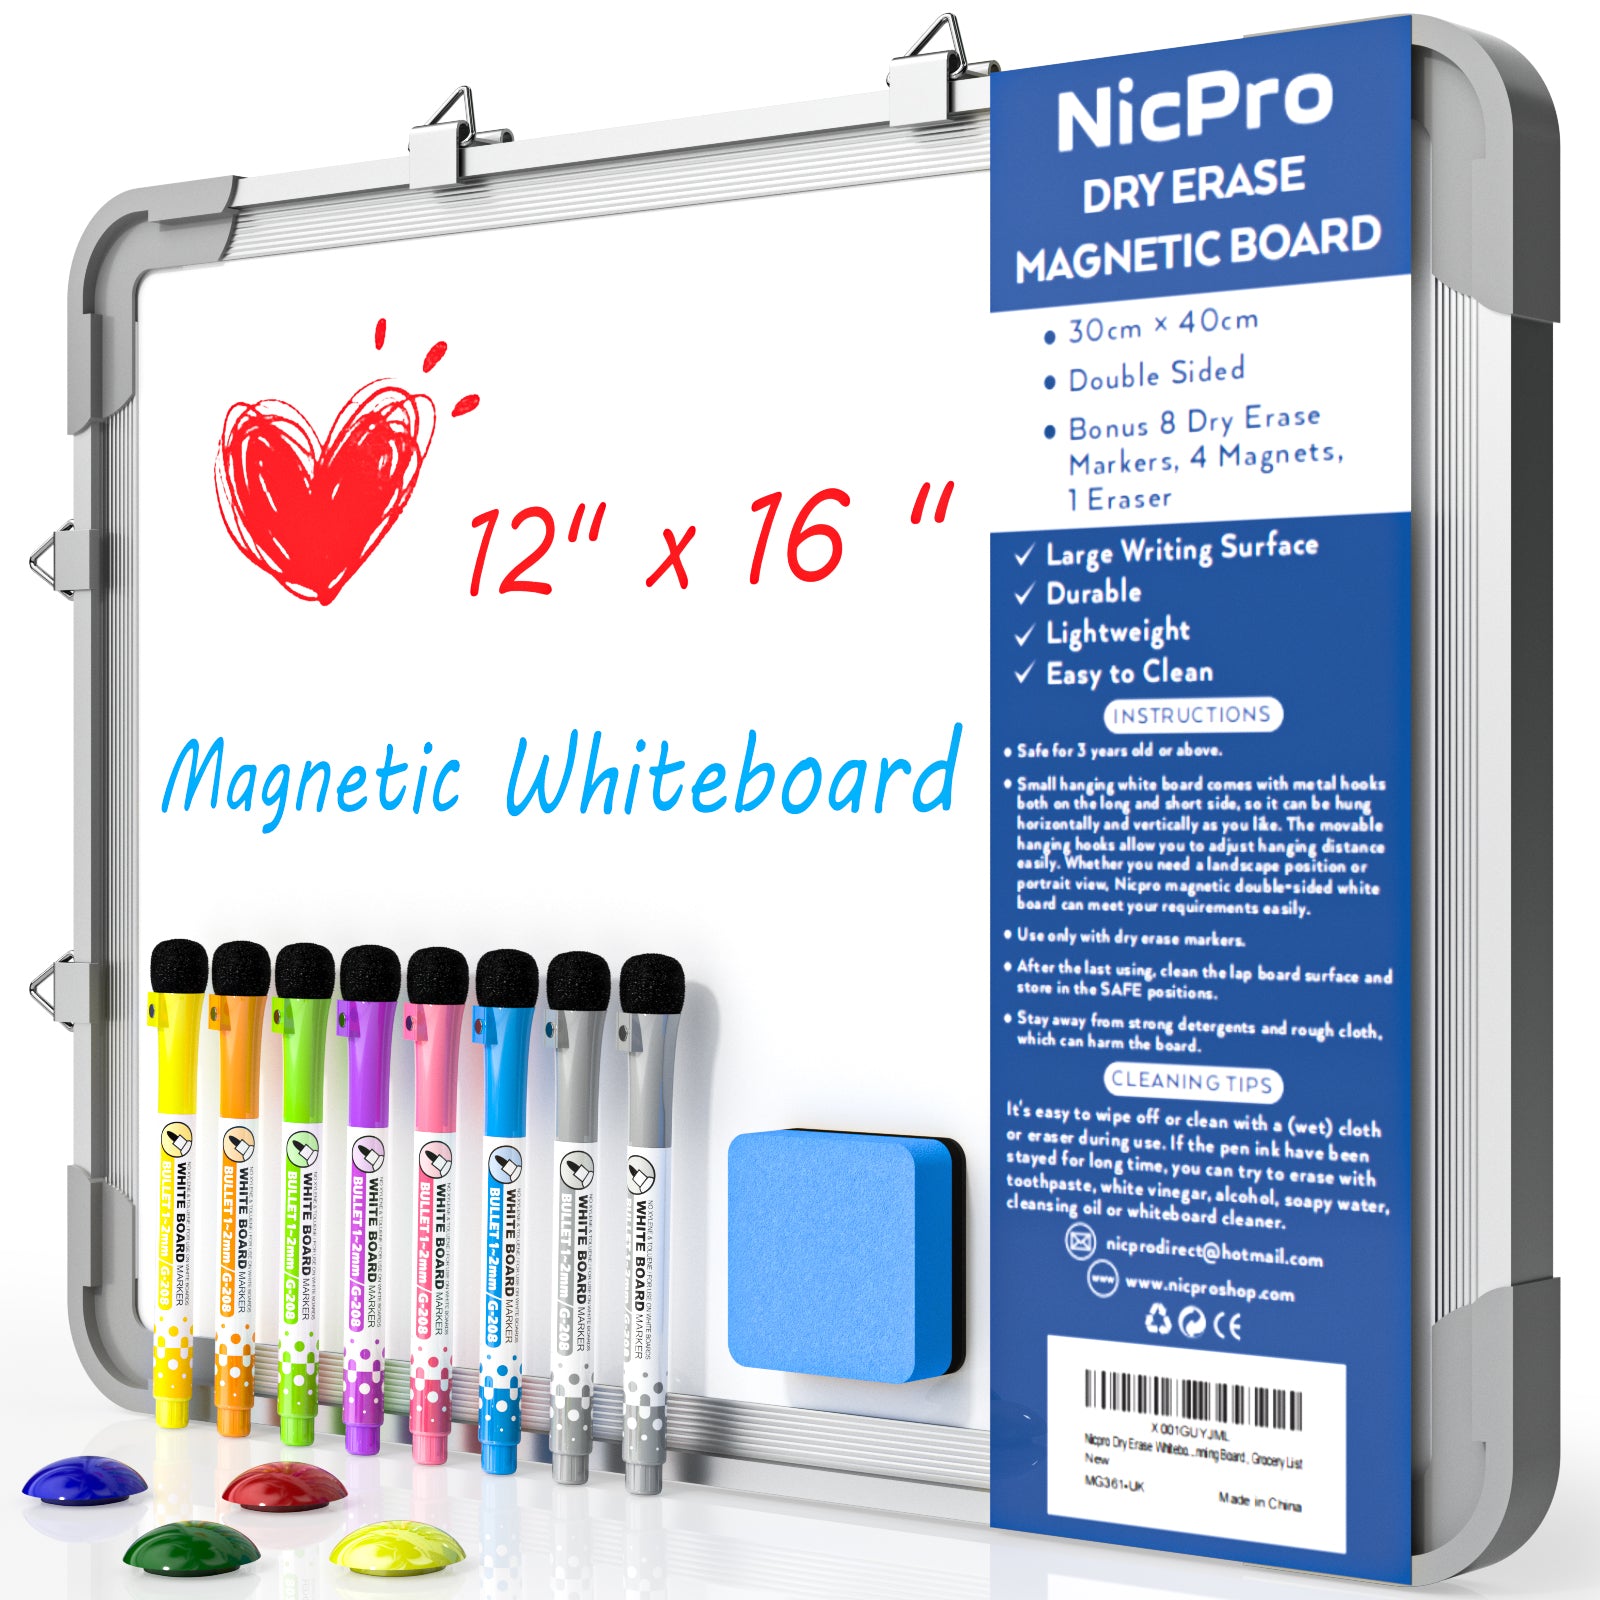 Nicpro Dry Erase Whiteboard Hanging, 12 x 16 inch Double Sided Large M